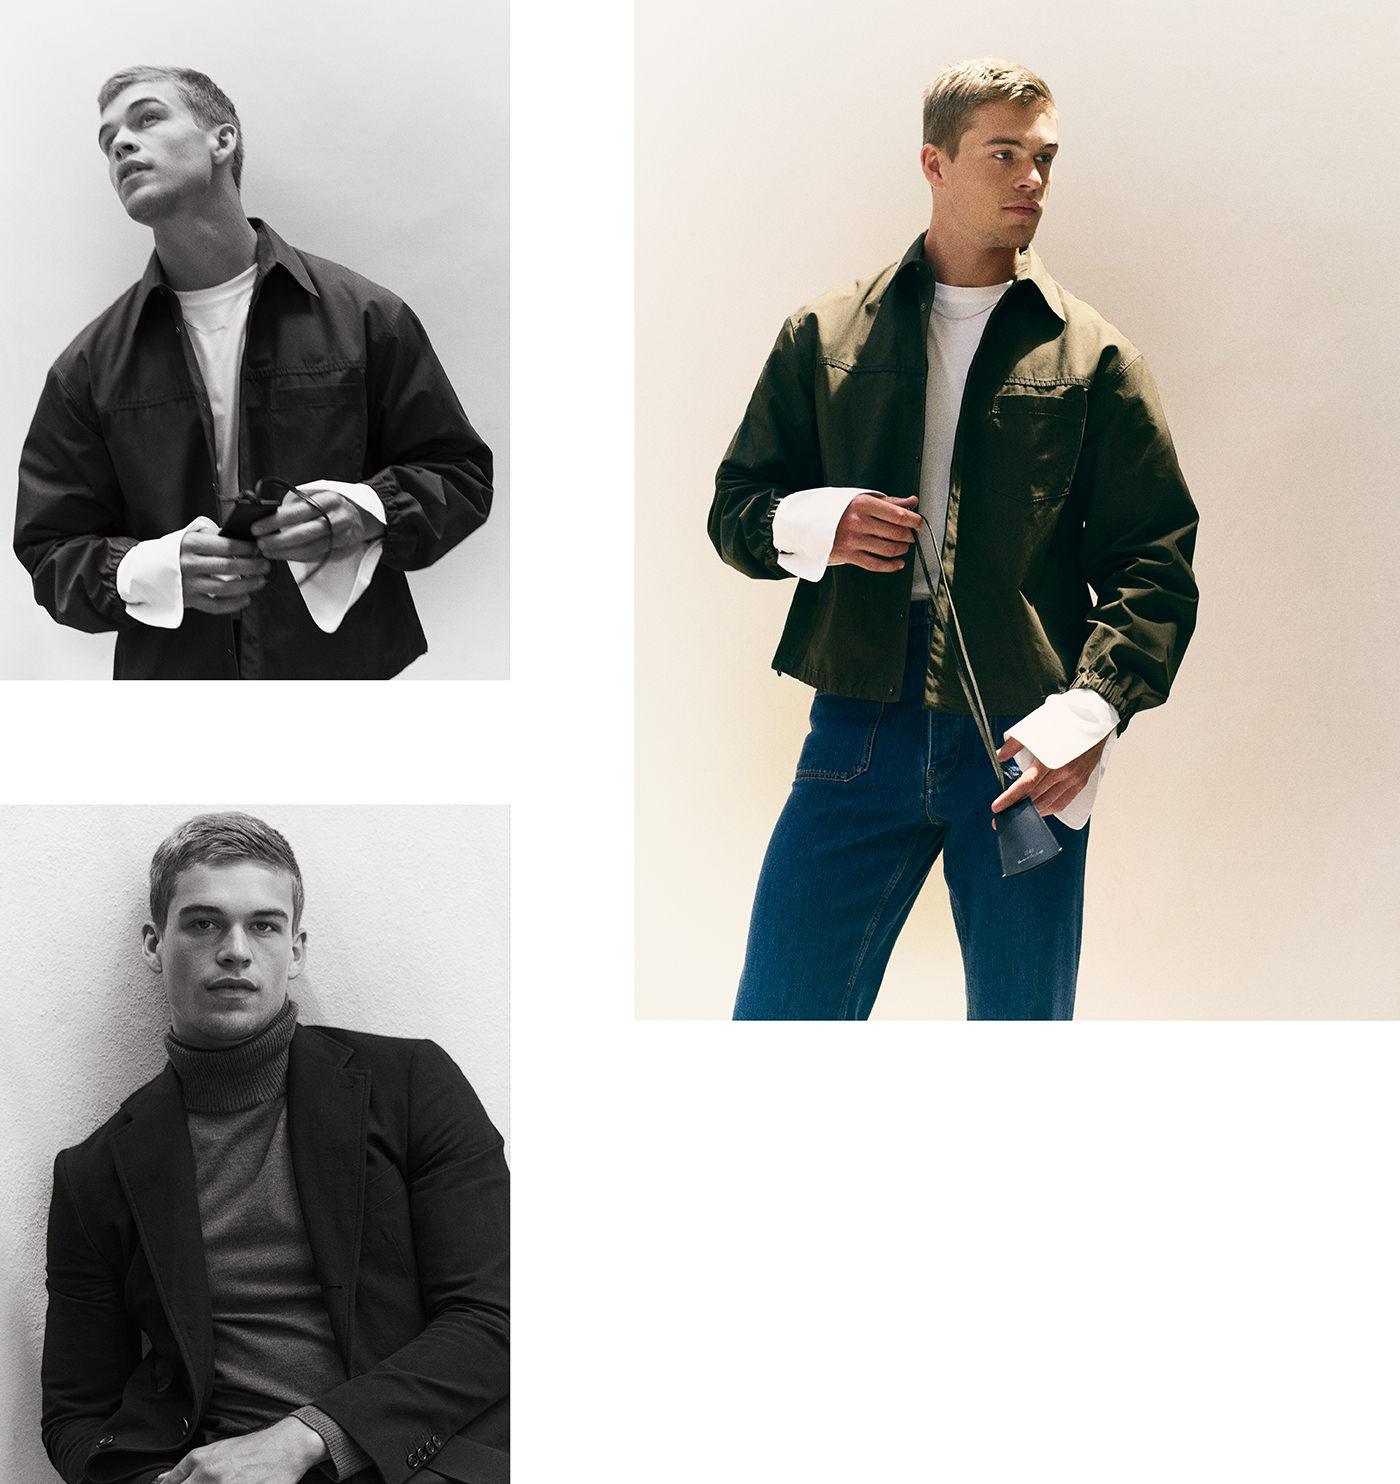 Top: Jacket by 3.1 Phillip Lim. Shirt by Dries Van Noten. Jeans by Loewe.Bottom left:  Jacket by Hermès. Sweater by A.P.C.